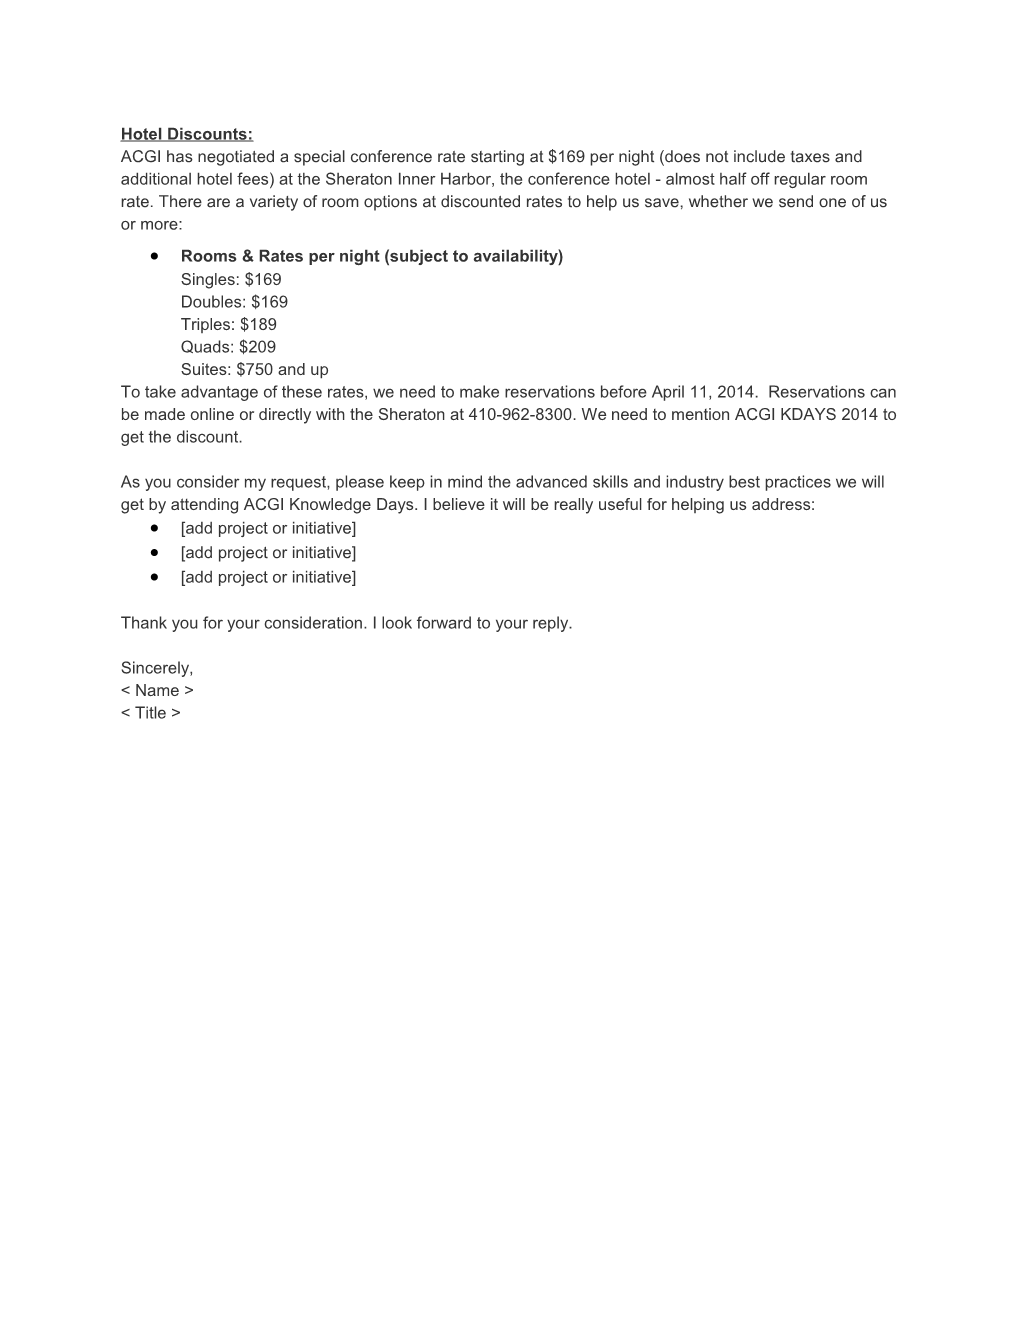 Justification Letter Template - ACGI Knowledge Days 2014 Users Conference